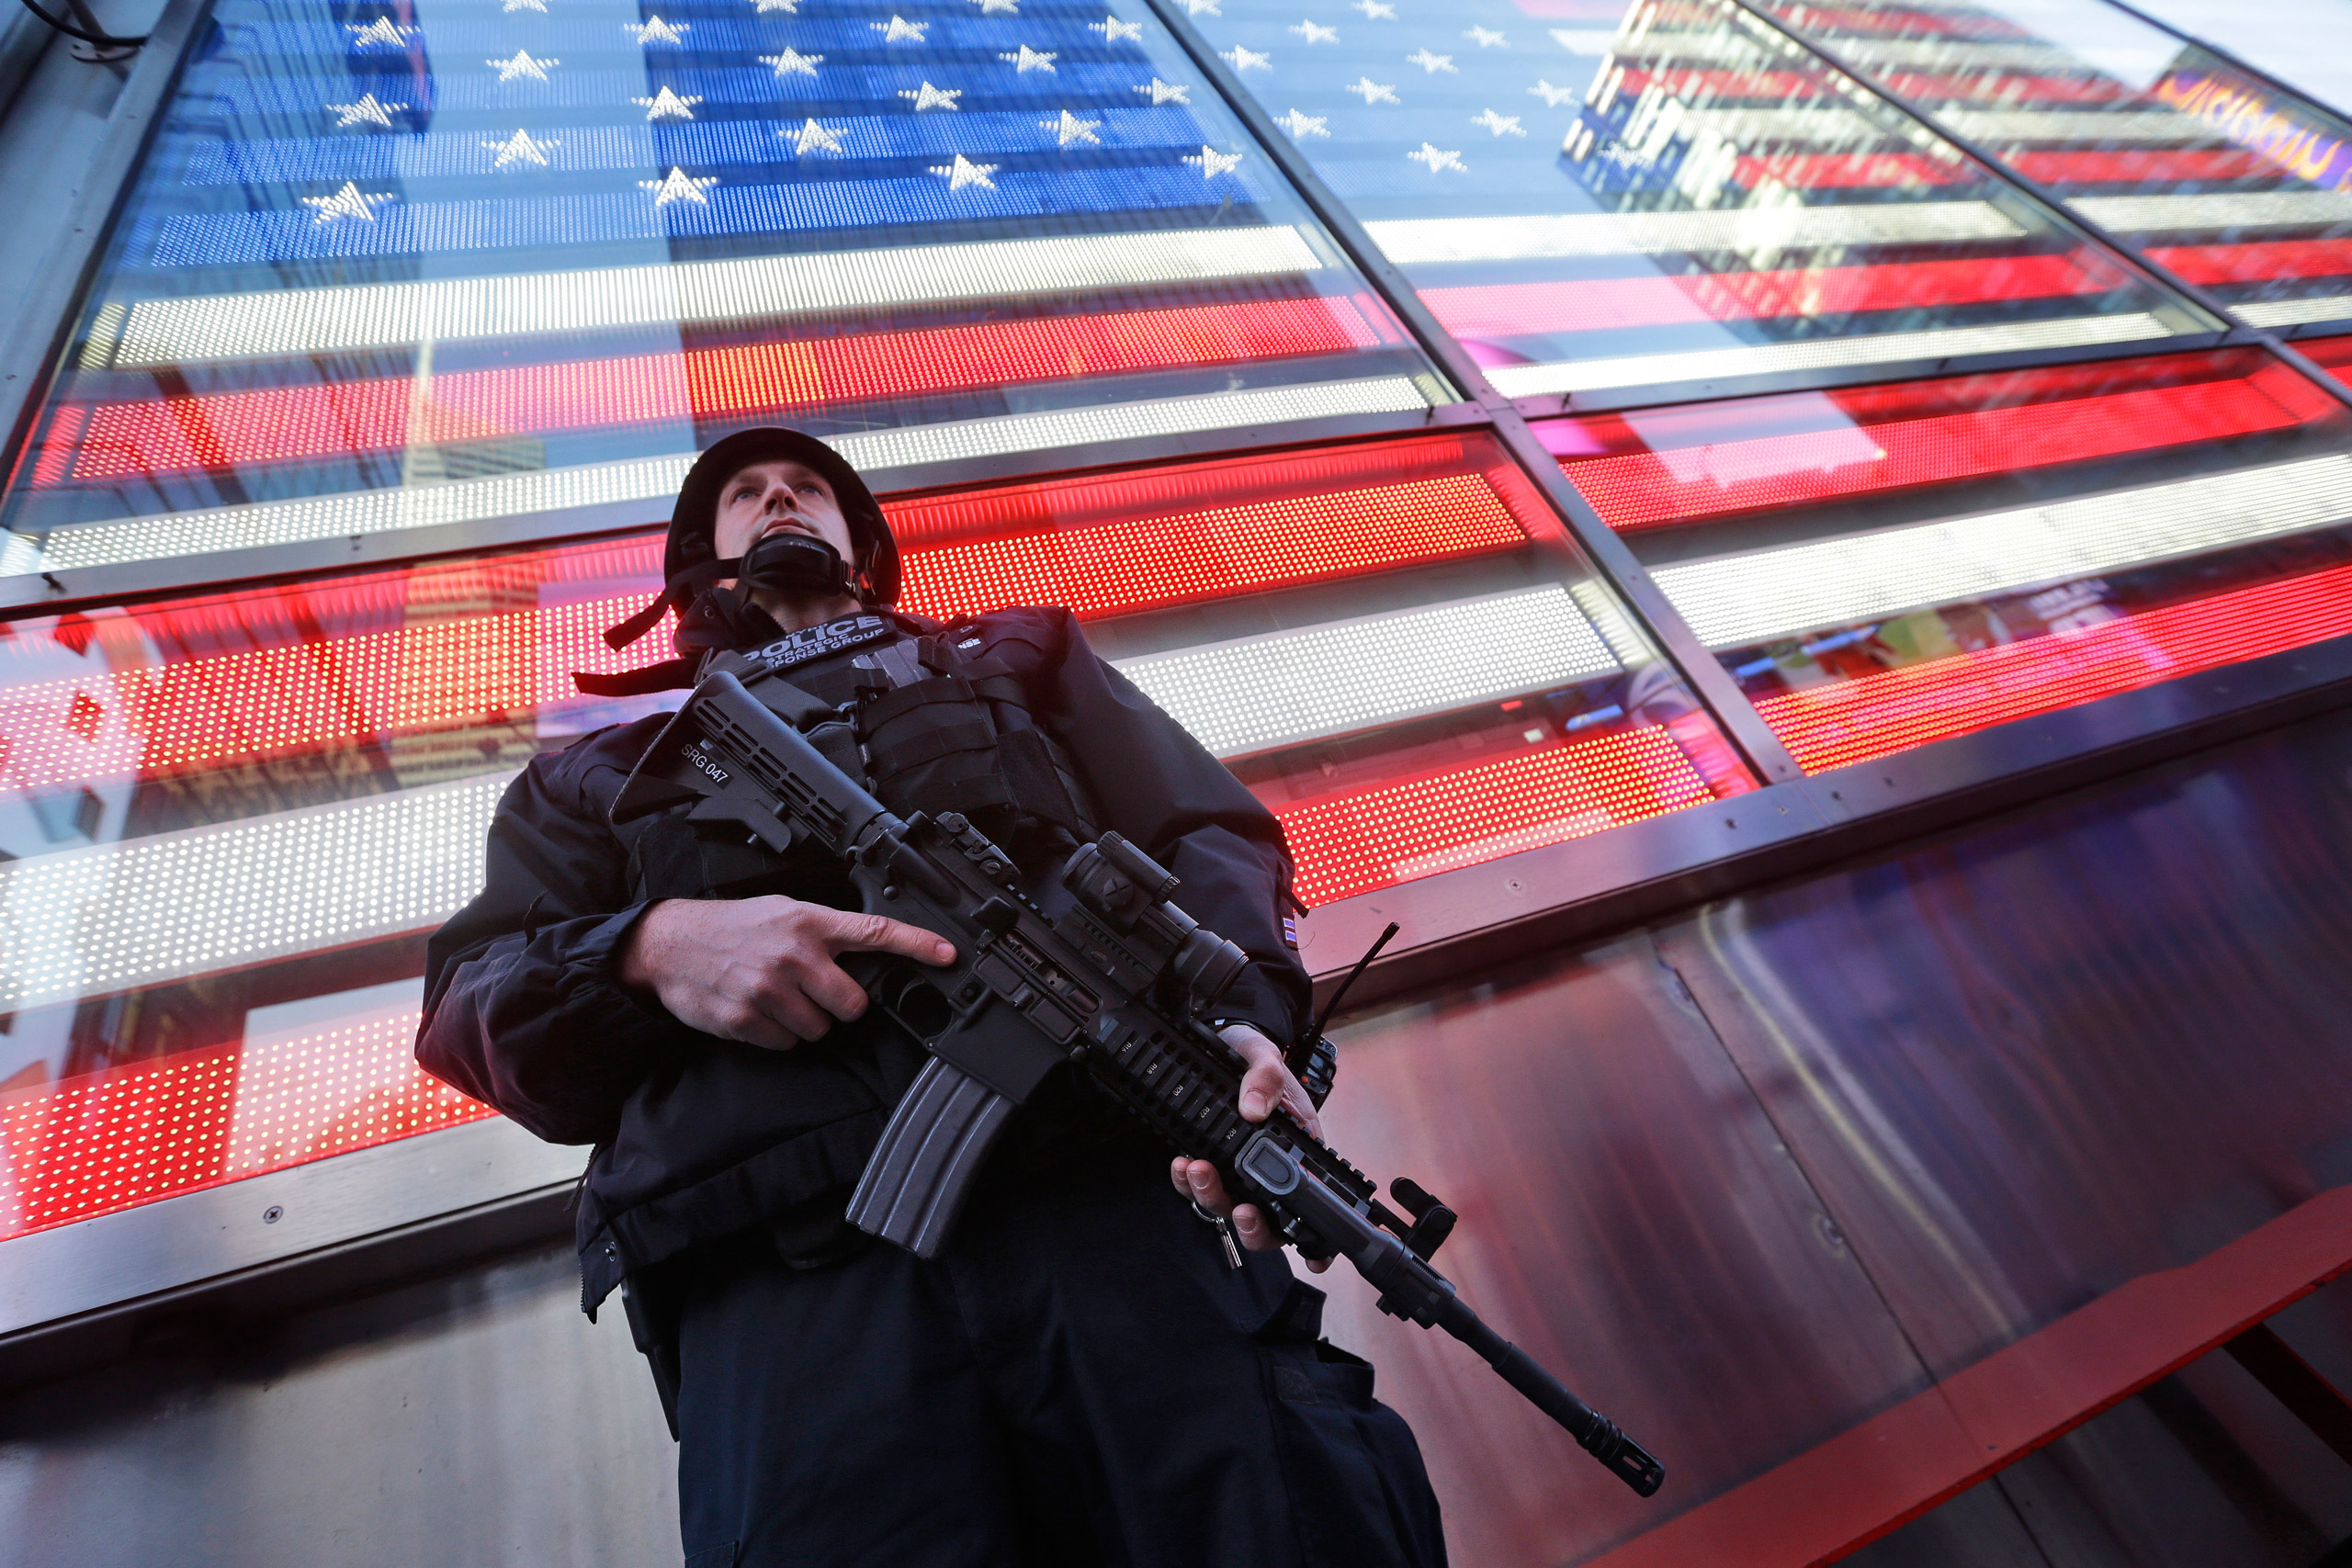 A heavily armed New York City police officer with the Strategic Response Group stands guard at the armed-forces recruiting center in Times Square in New York City on Nov. 14, 2015 (Mary Altaffer—AP)